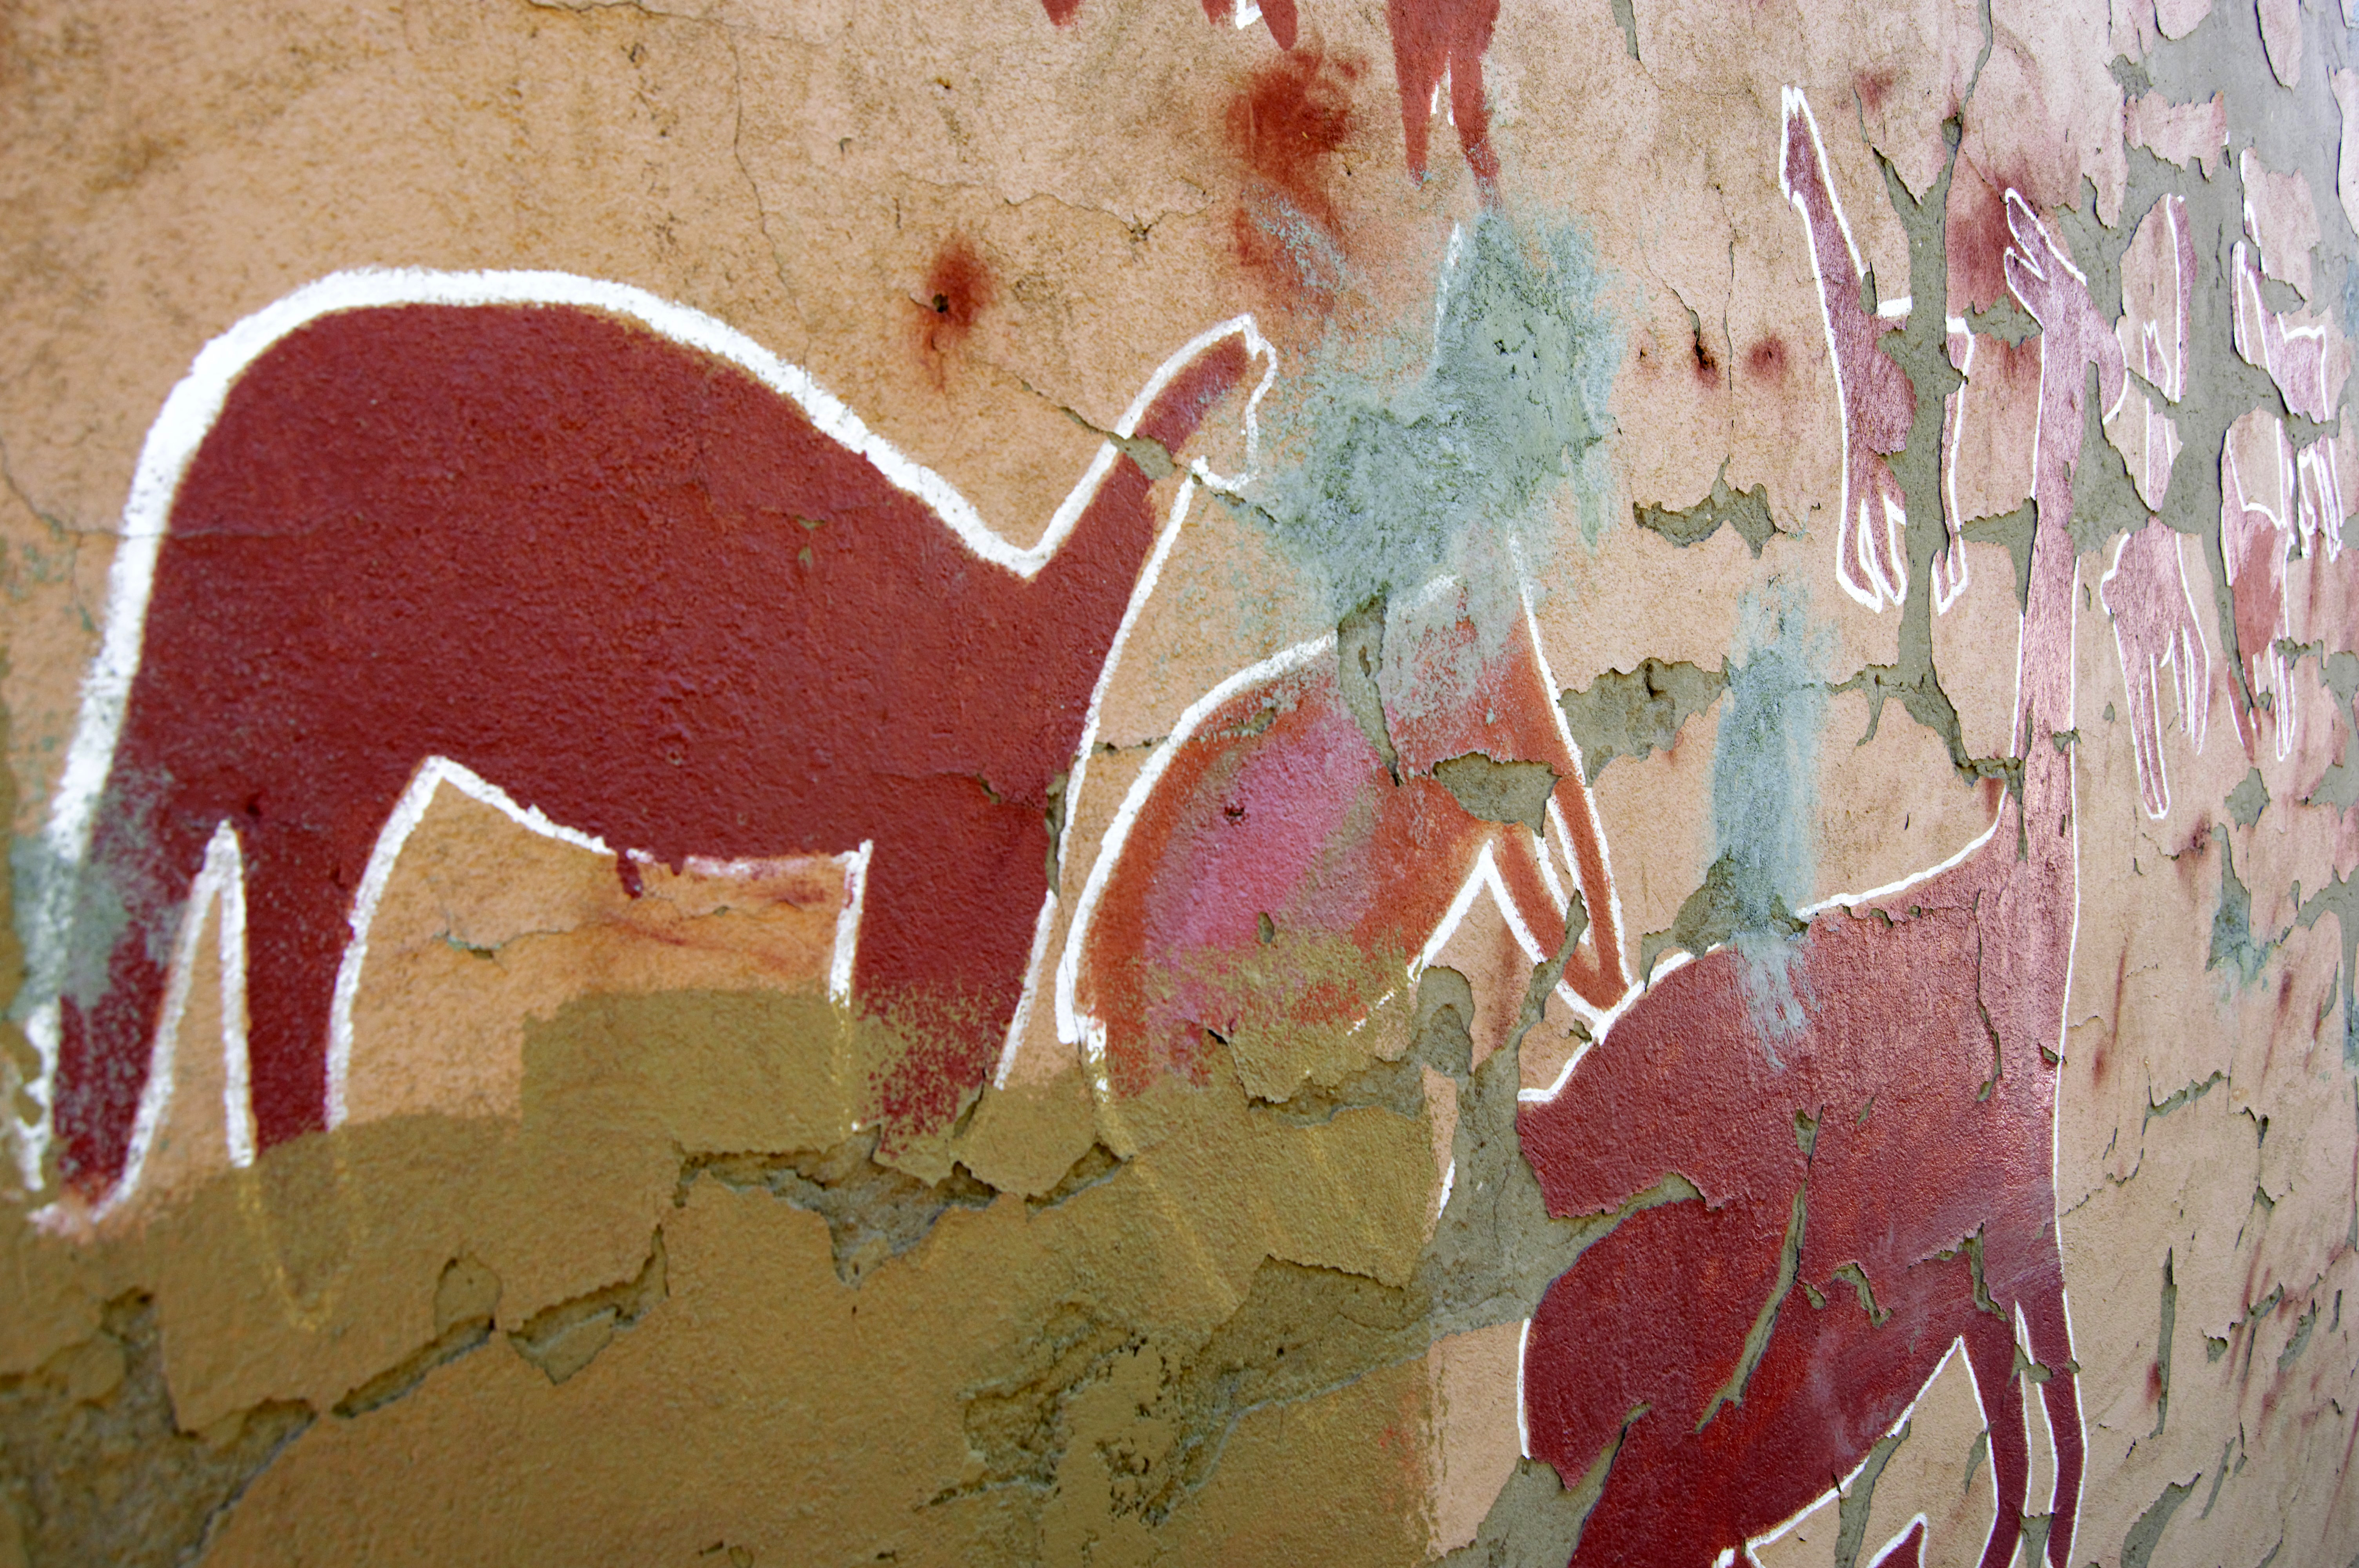 photo of wall painting in Chile taken by a Northeastern Student during a Dialogue of Civilizations program